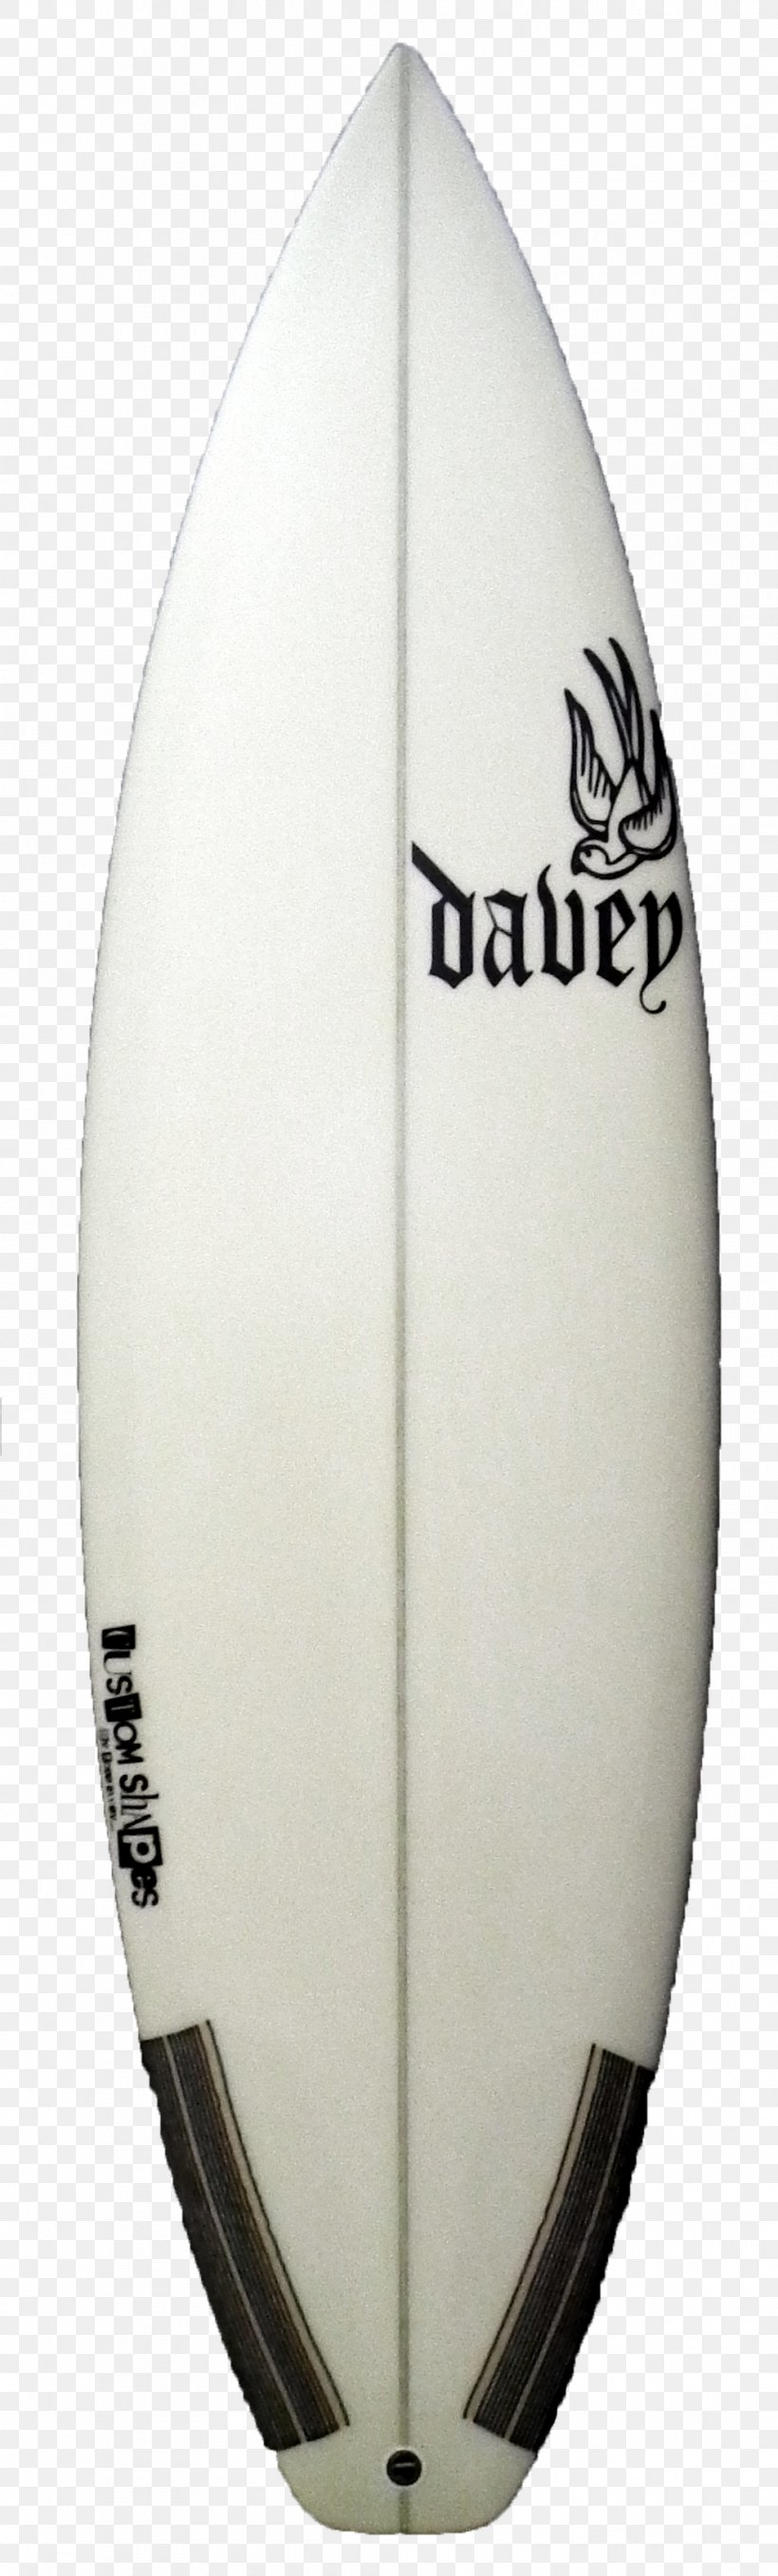 Surfboard Quality, PNG, 994x3290px, Surfboard, Craft, Quality, Sports Equipment, Surfing Equipment And Supplies Download Free